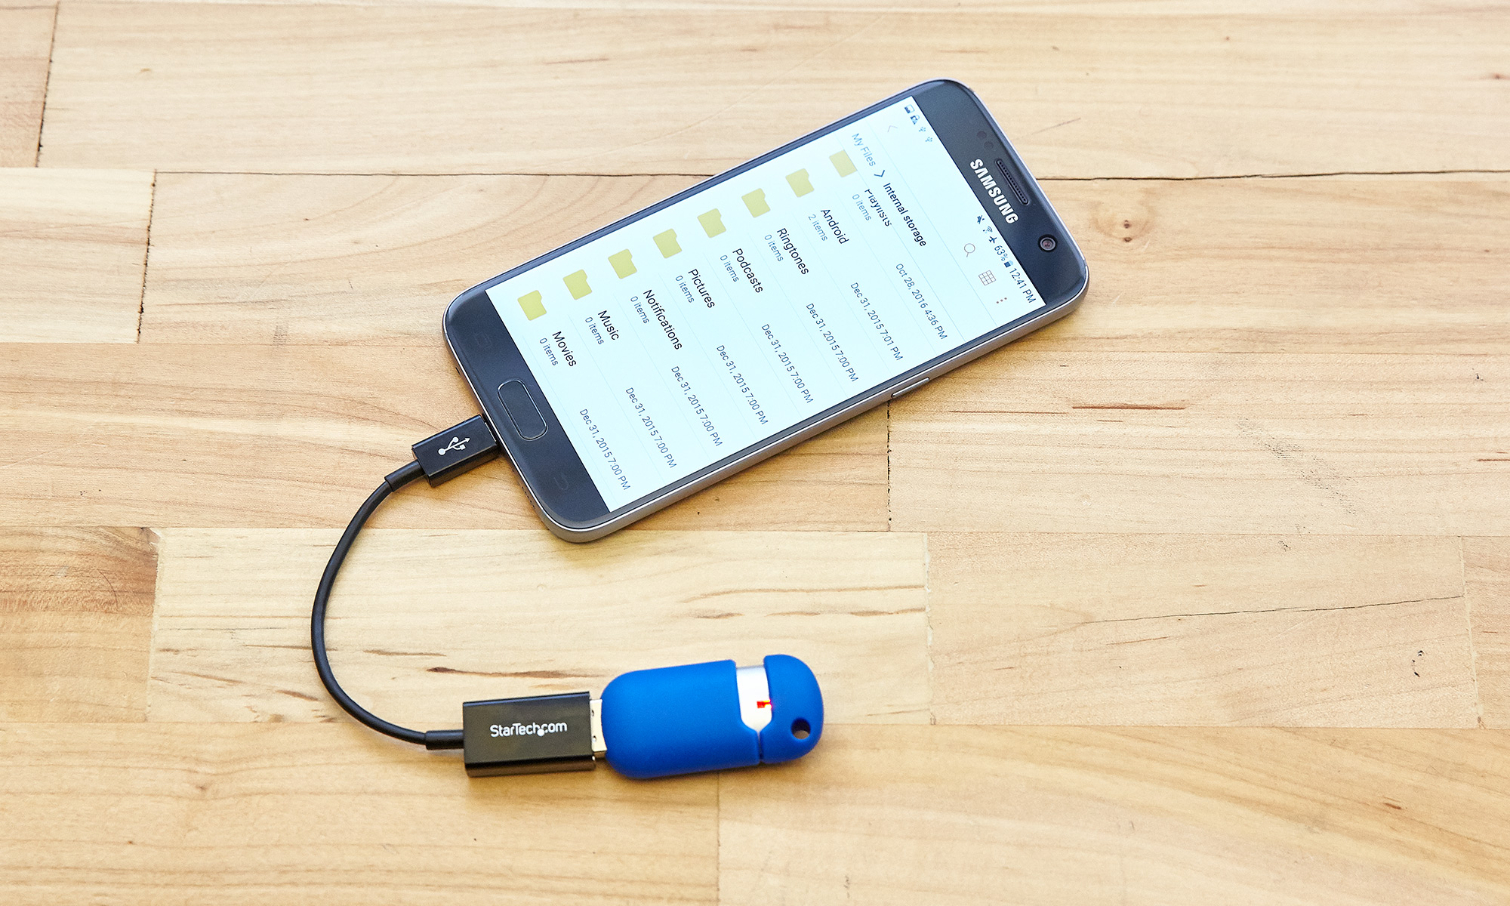 Venlighed finansiere gallon How to Connect USB Storage Devices to Your Android Phone | Tom's Guide